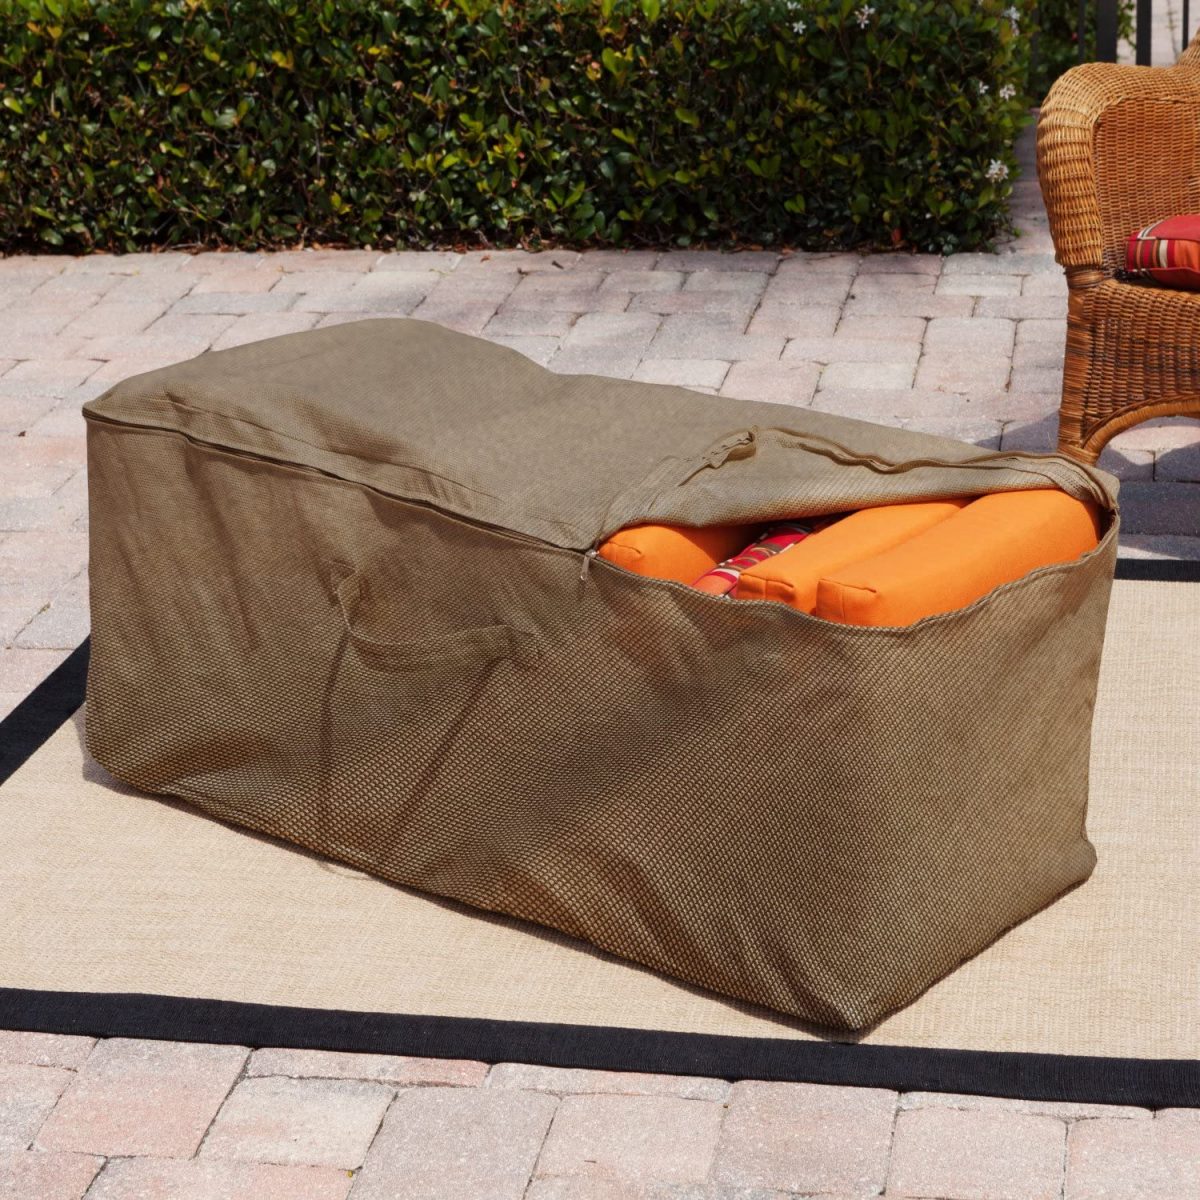 Details about   Waterproof Heavy Duty  Garden Furniture Cushion Cover Outdoor Pouch Storage Bag 